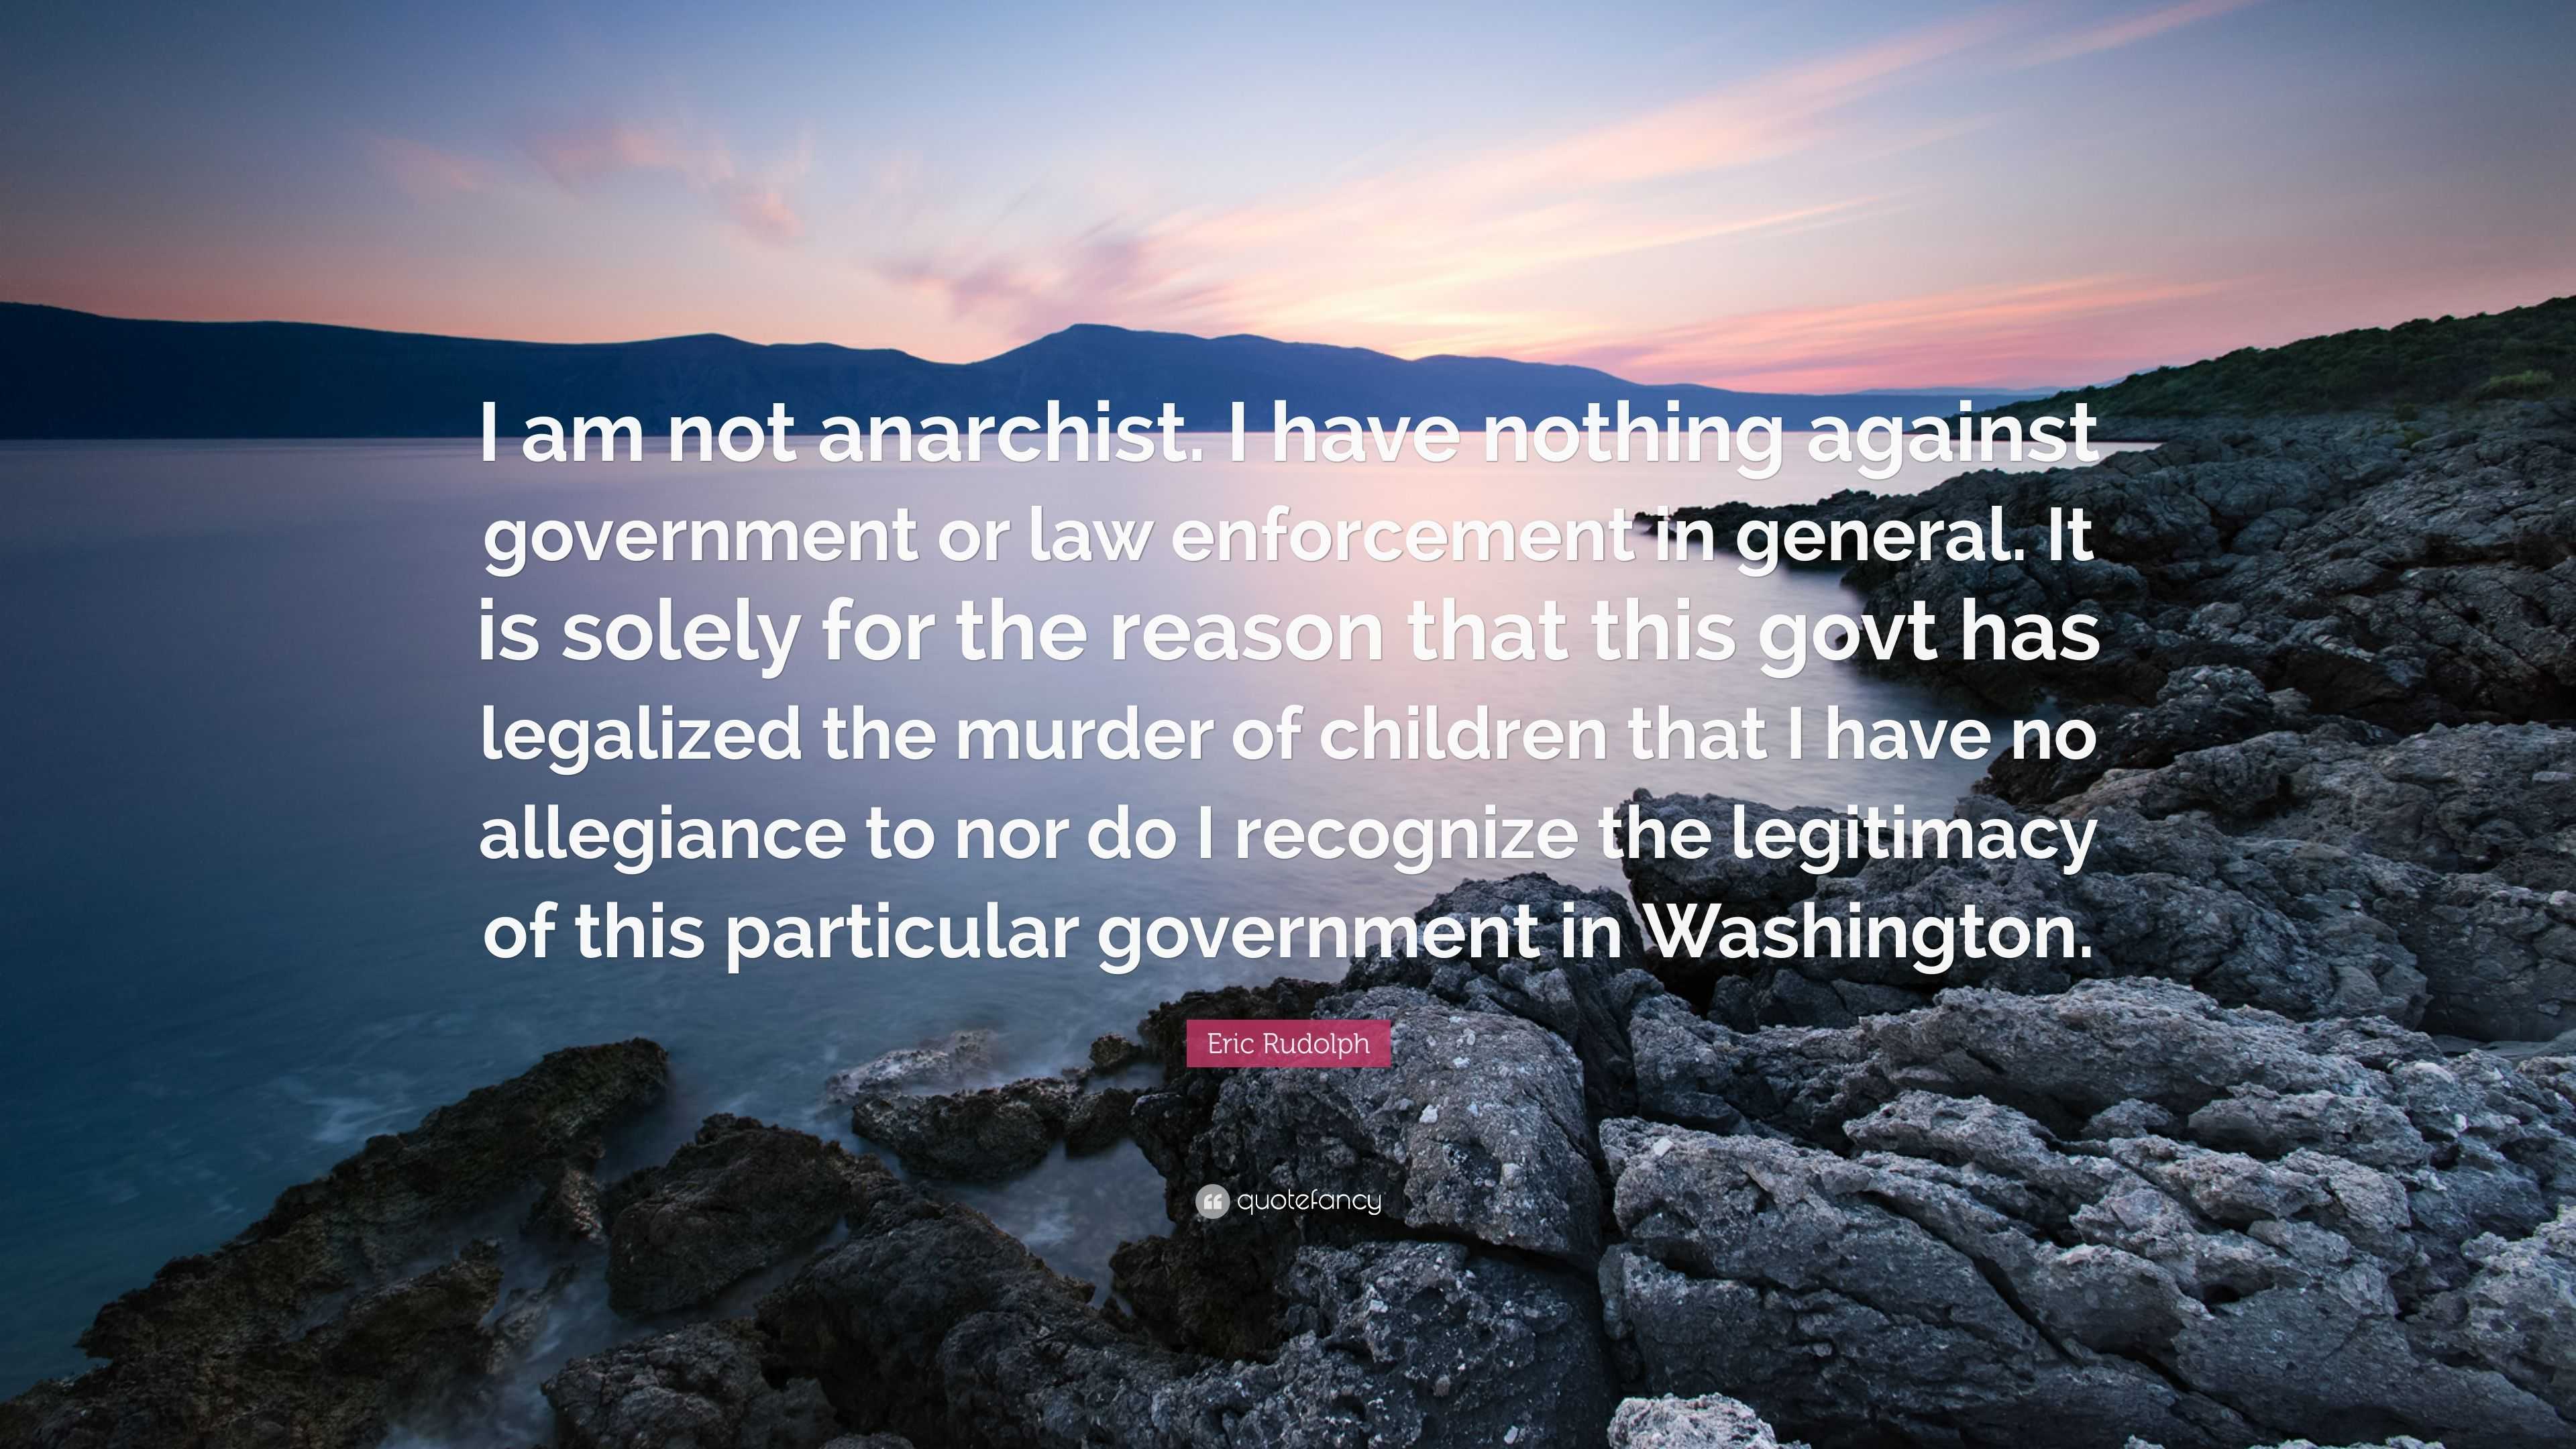 Eric Rudolph Quote: "I am not anarchist. I have nothing ...